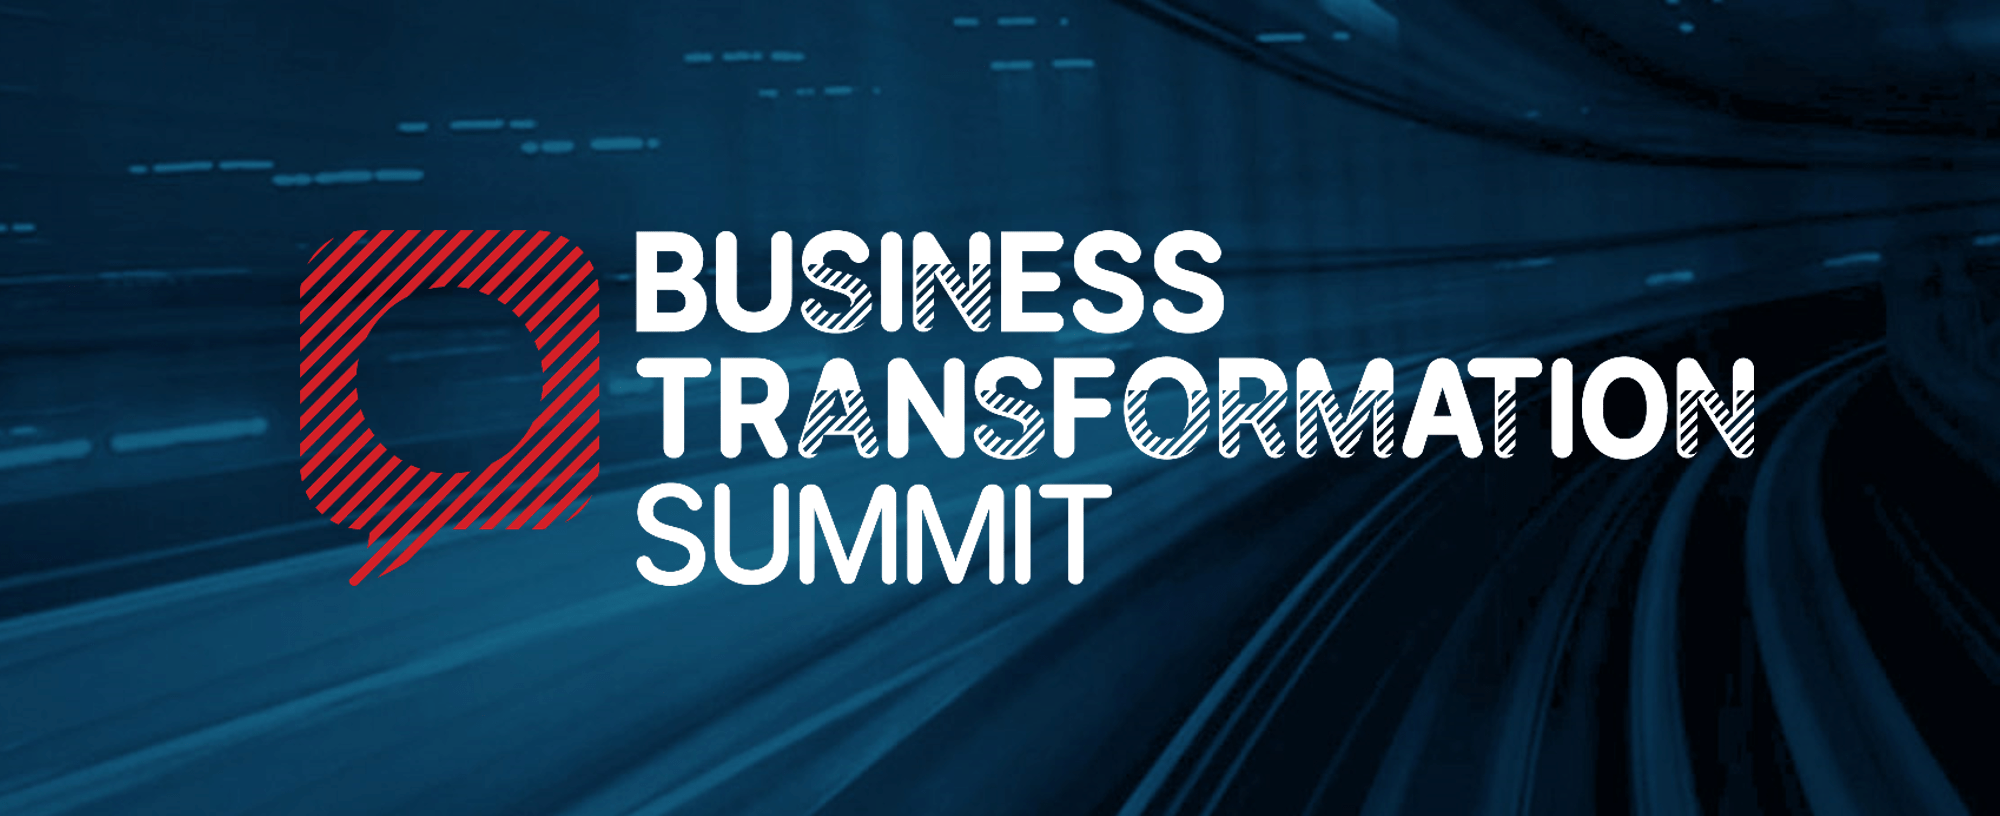 Business Transformation Summit: acceleration is the way to go!